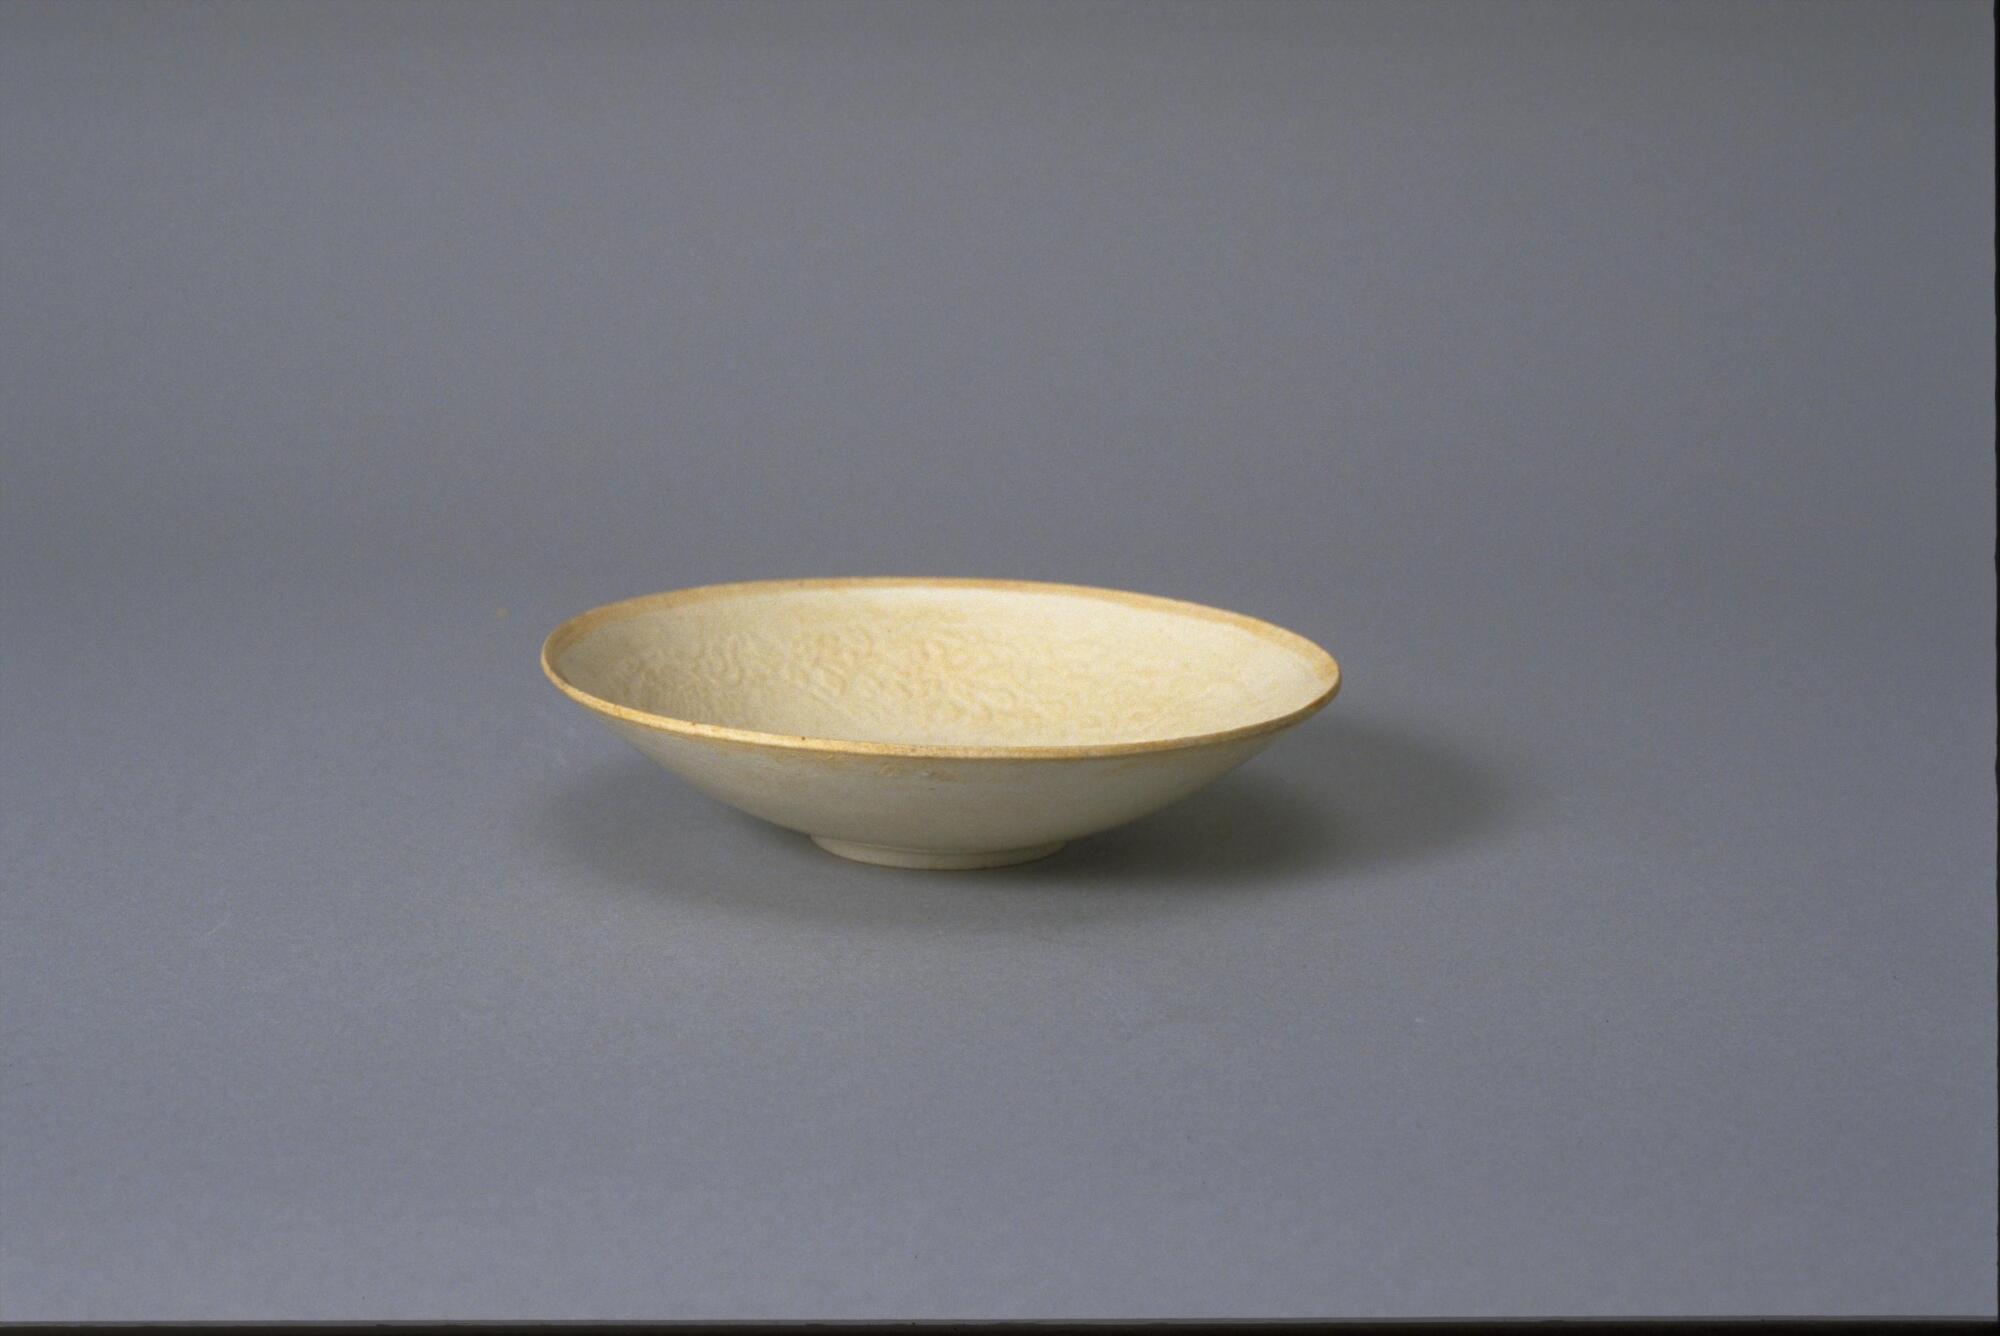 This thin porcelain conical bowl with direct rim on a footring has an interior with incised floral meander decoration. It is covered in a white glaze with bluish tinge and has an unglazed rim.